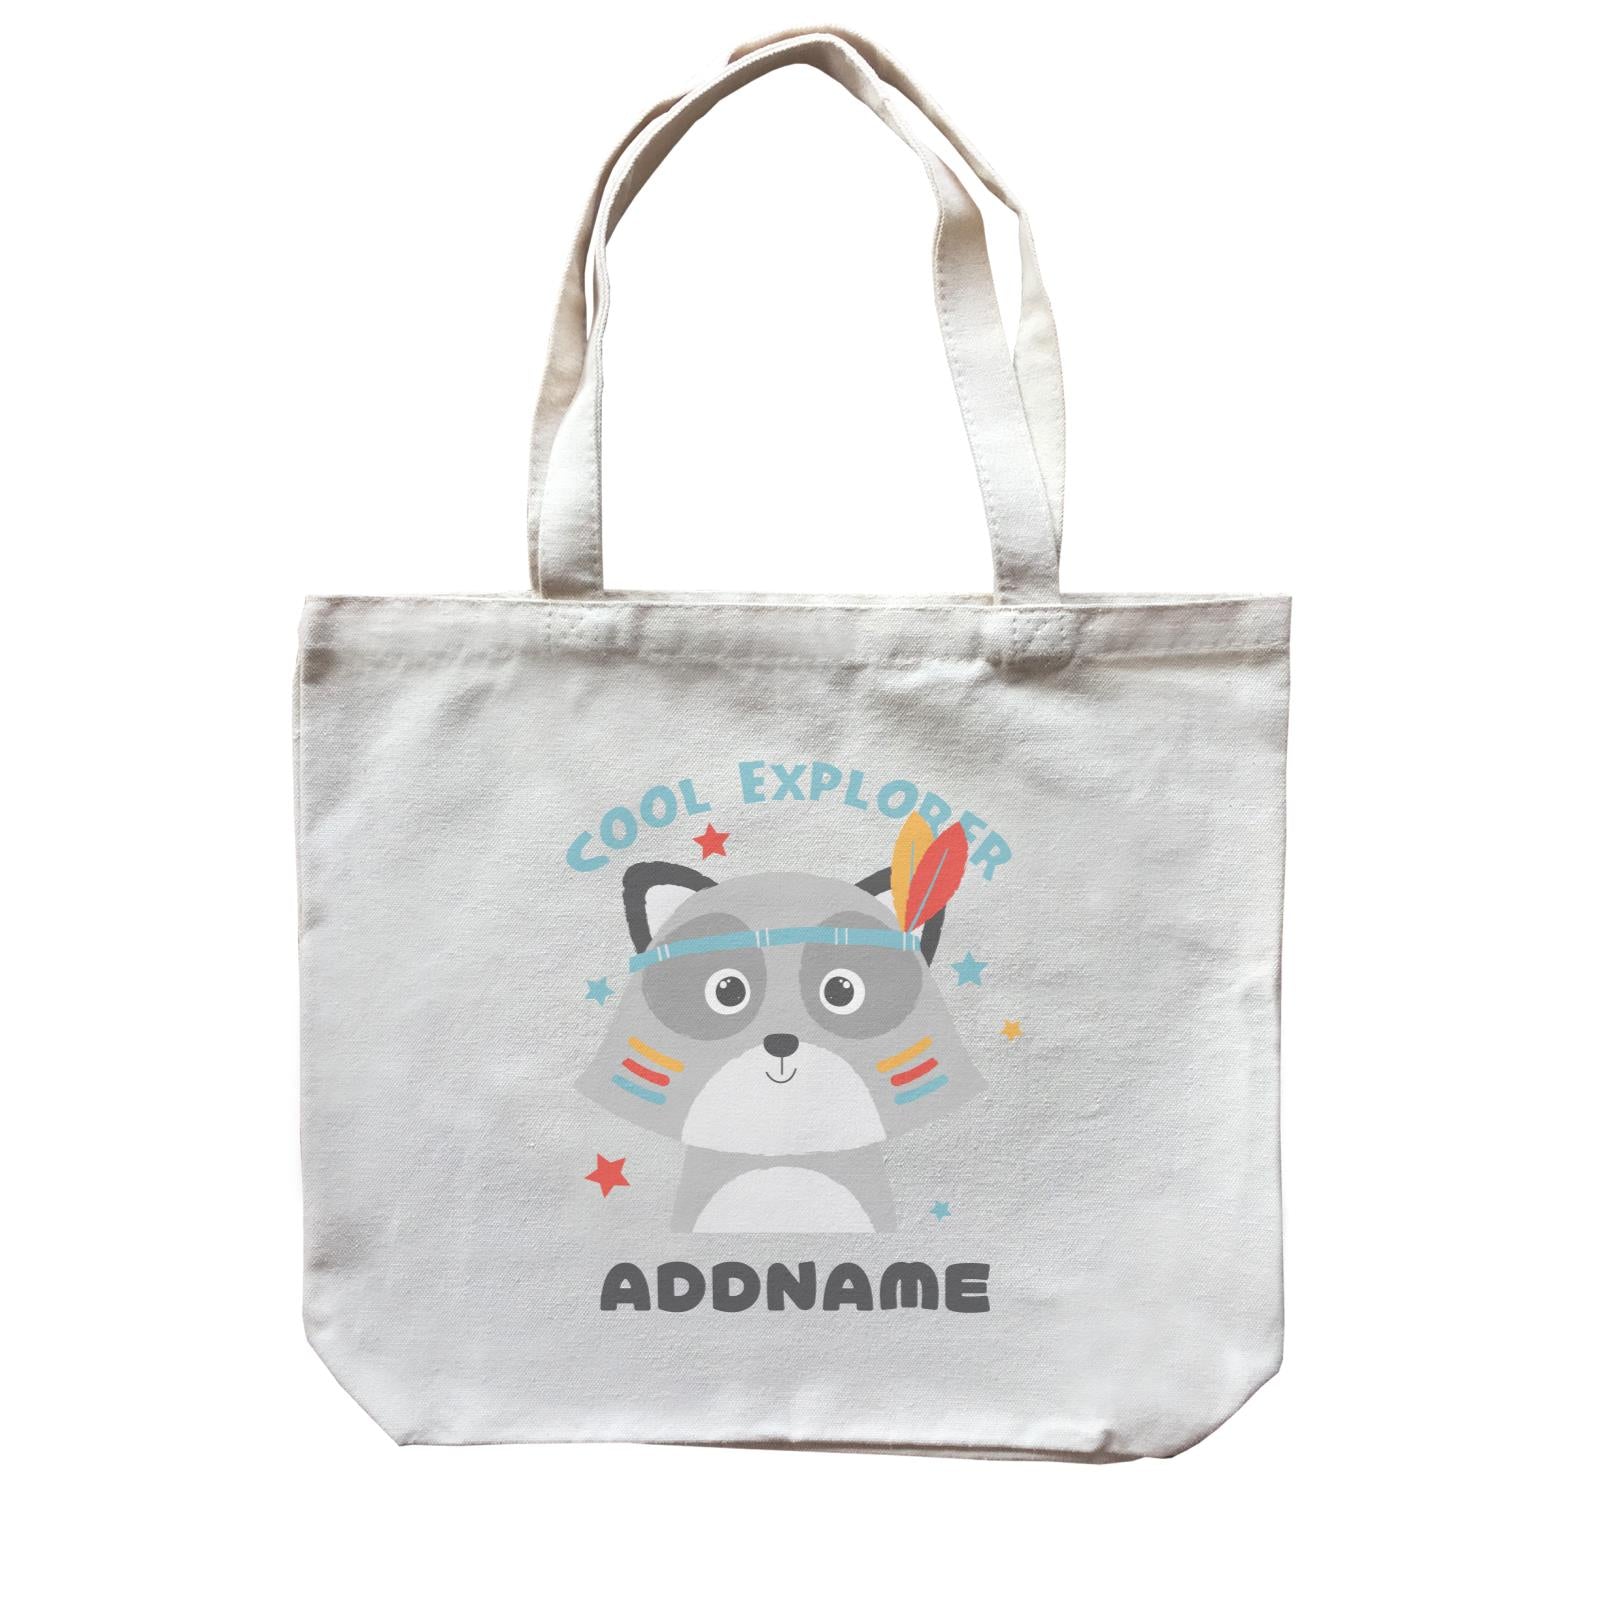 Cool Explorer Racoon Addname Canvas Bag